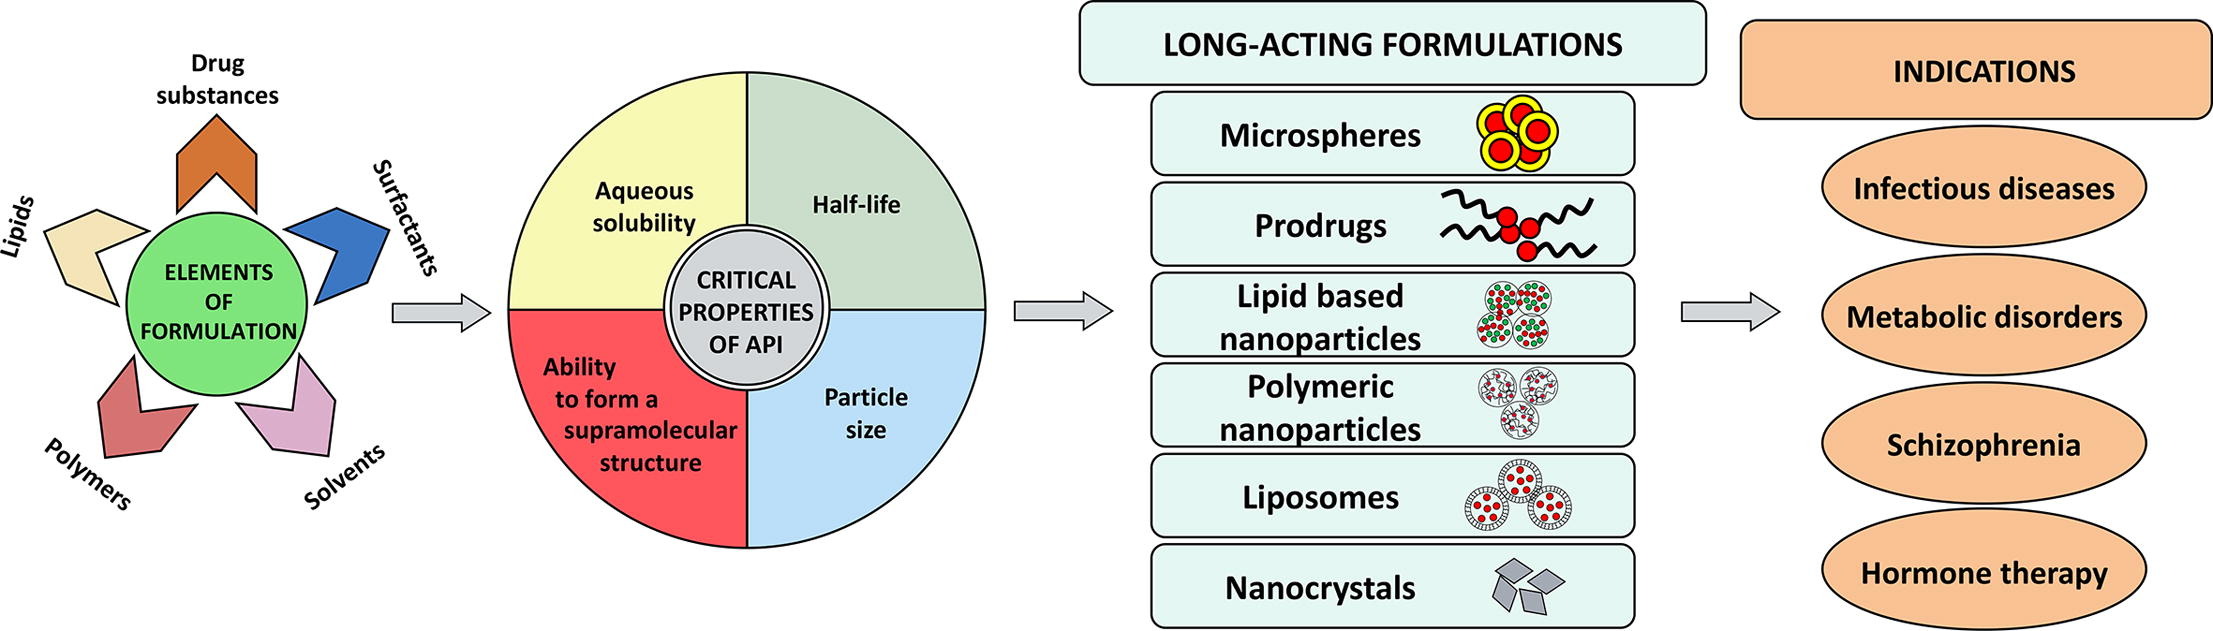 Long-acting Parenteral Drug Delivery Systems for the Treatment of Chronic Diseases